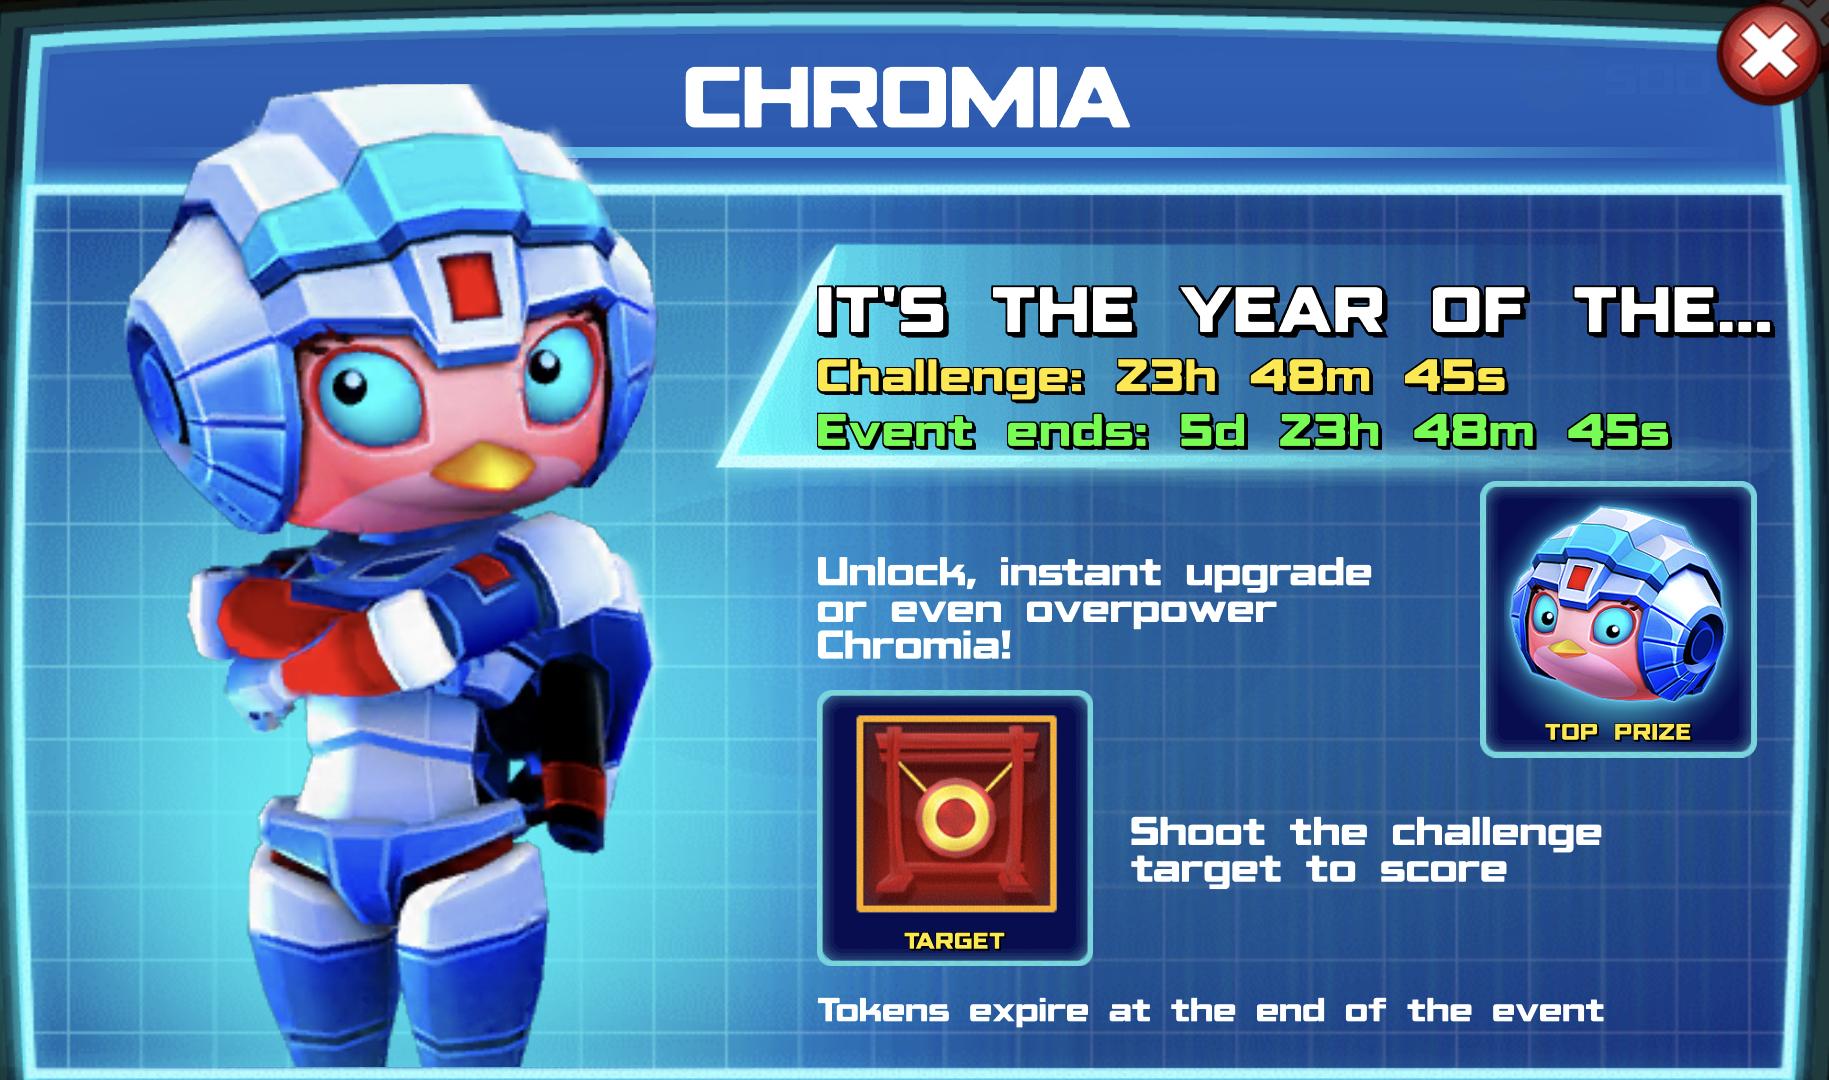 The event banner for Chromia